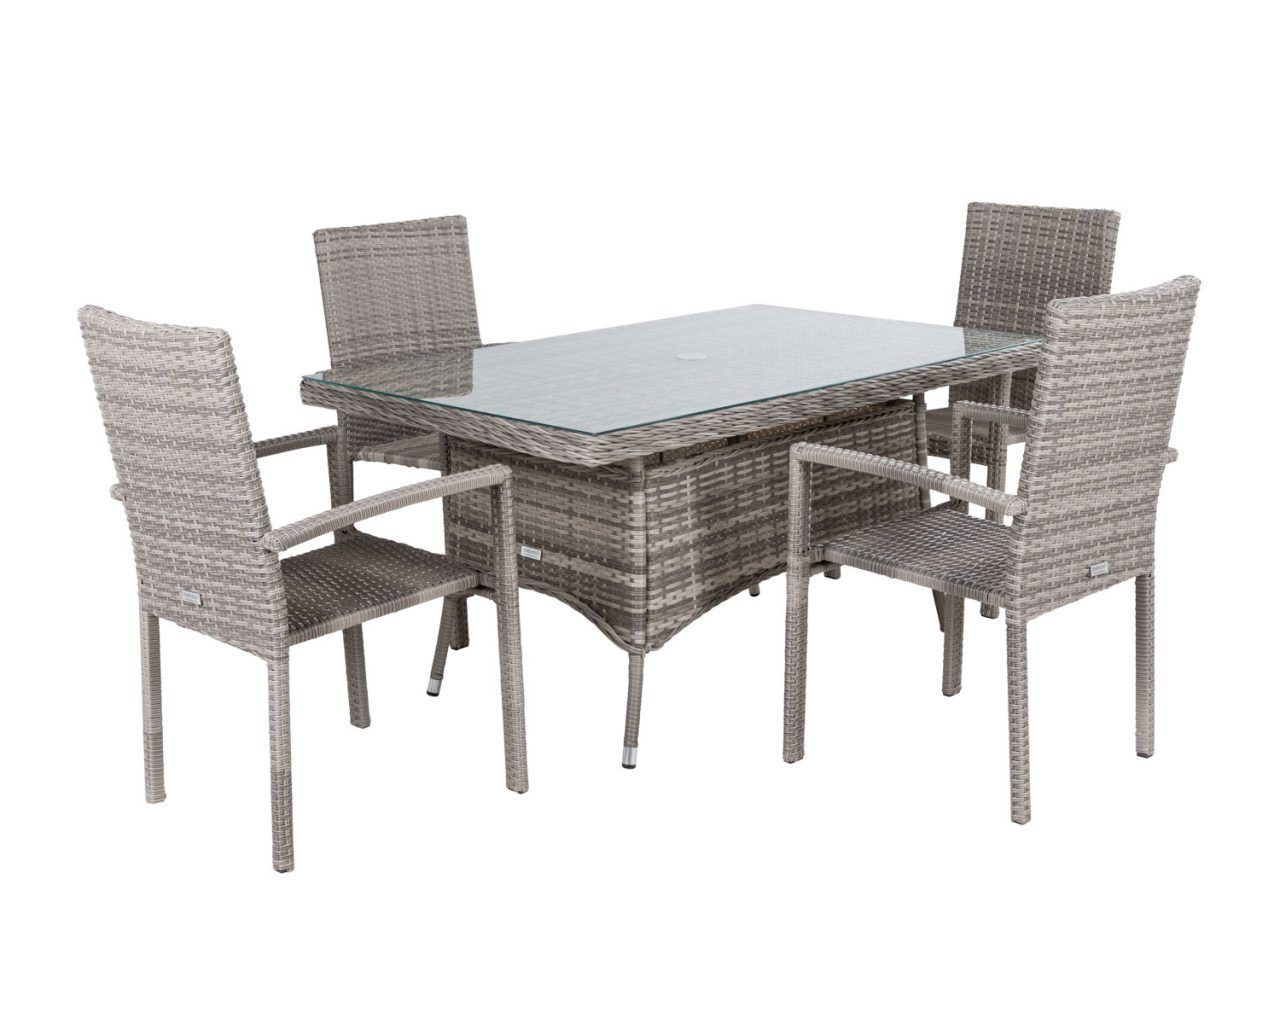 4 Seat Rattan Garden Dining Set With Small Rectangular Dining Table In For Well Known Gray Wicker Rectangular Patio Dining Sets (View 2 of 15)